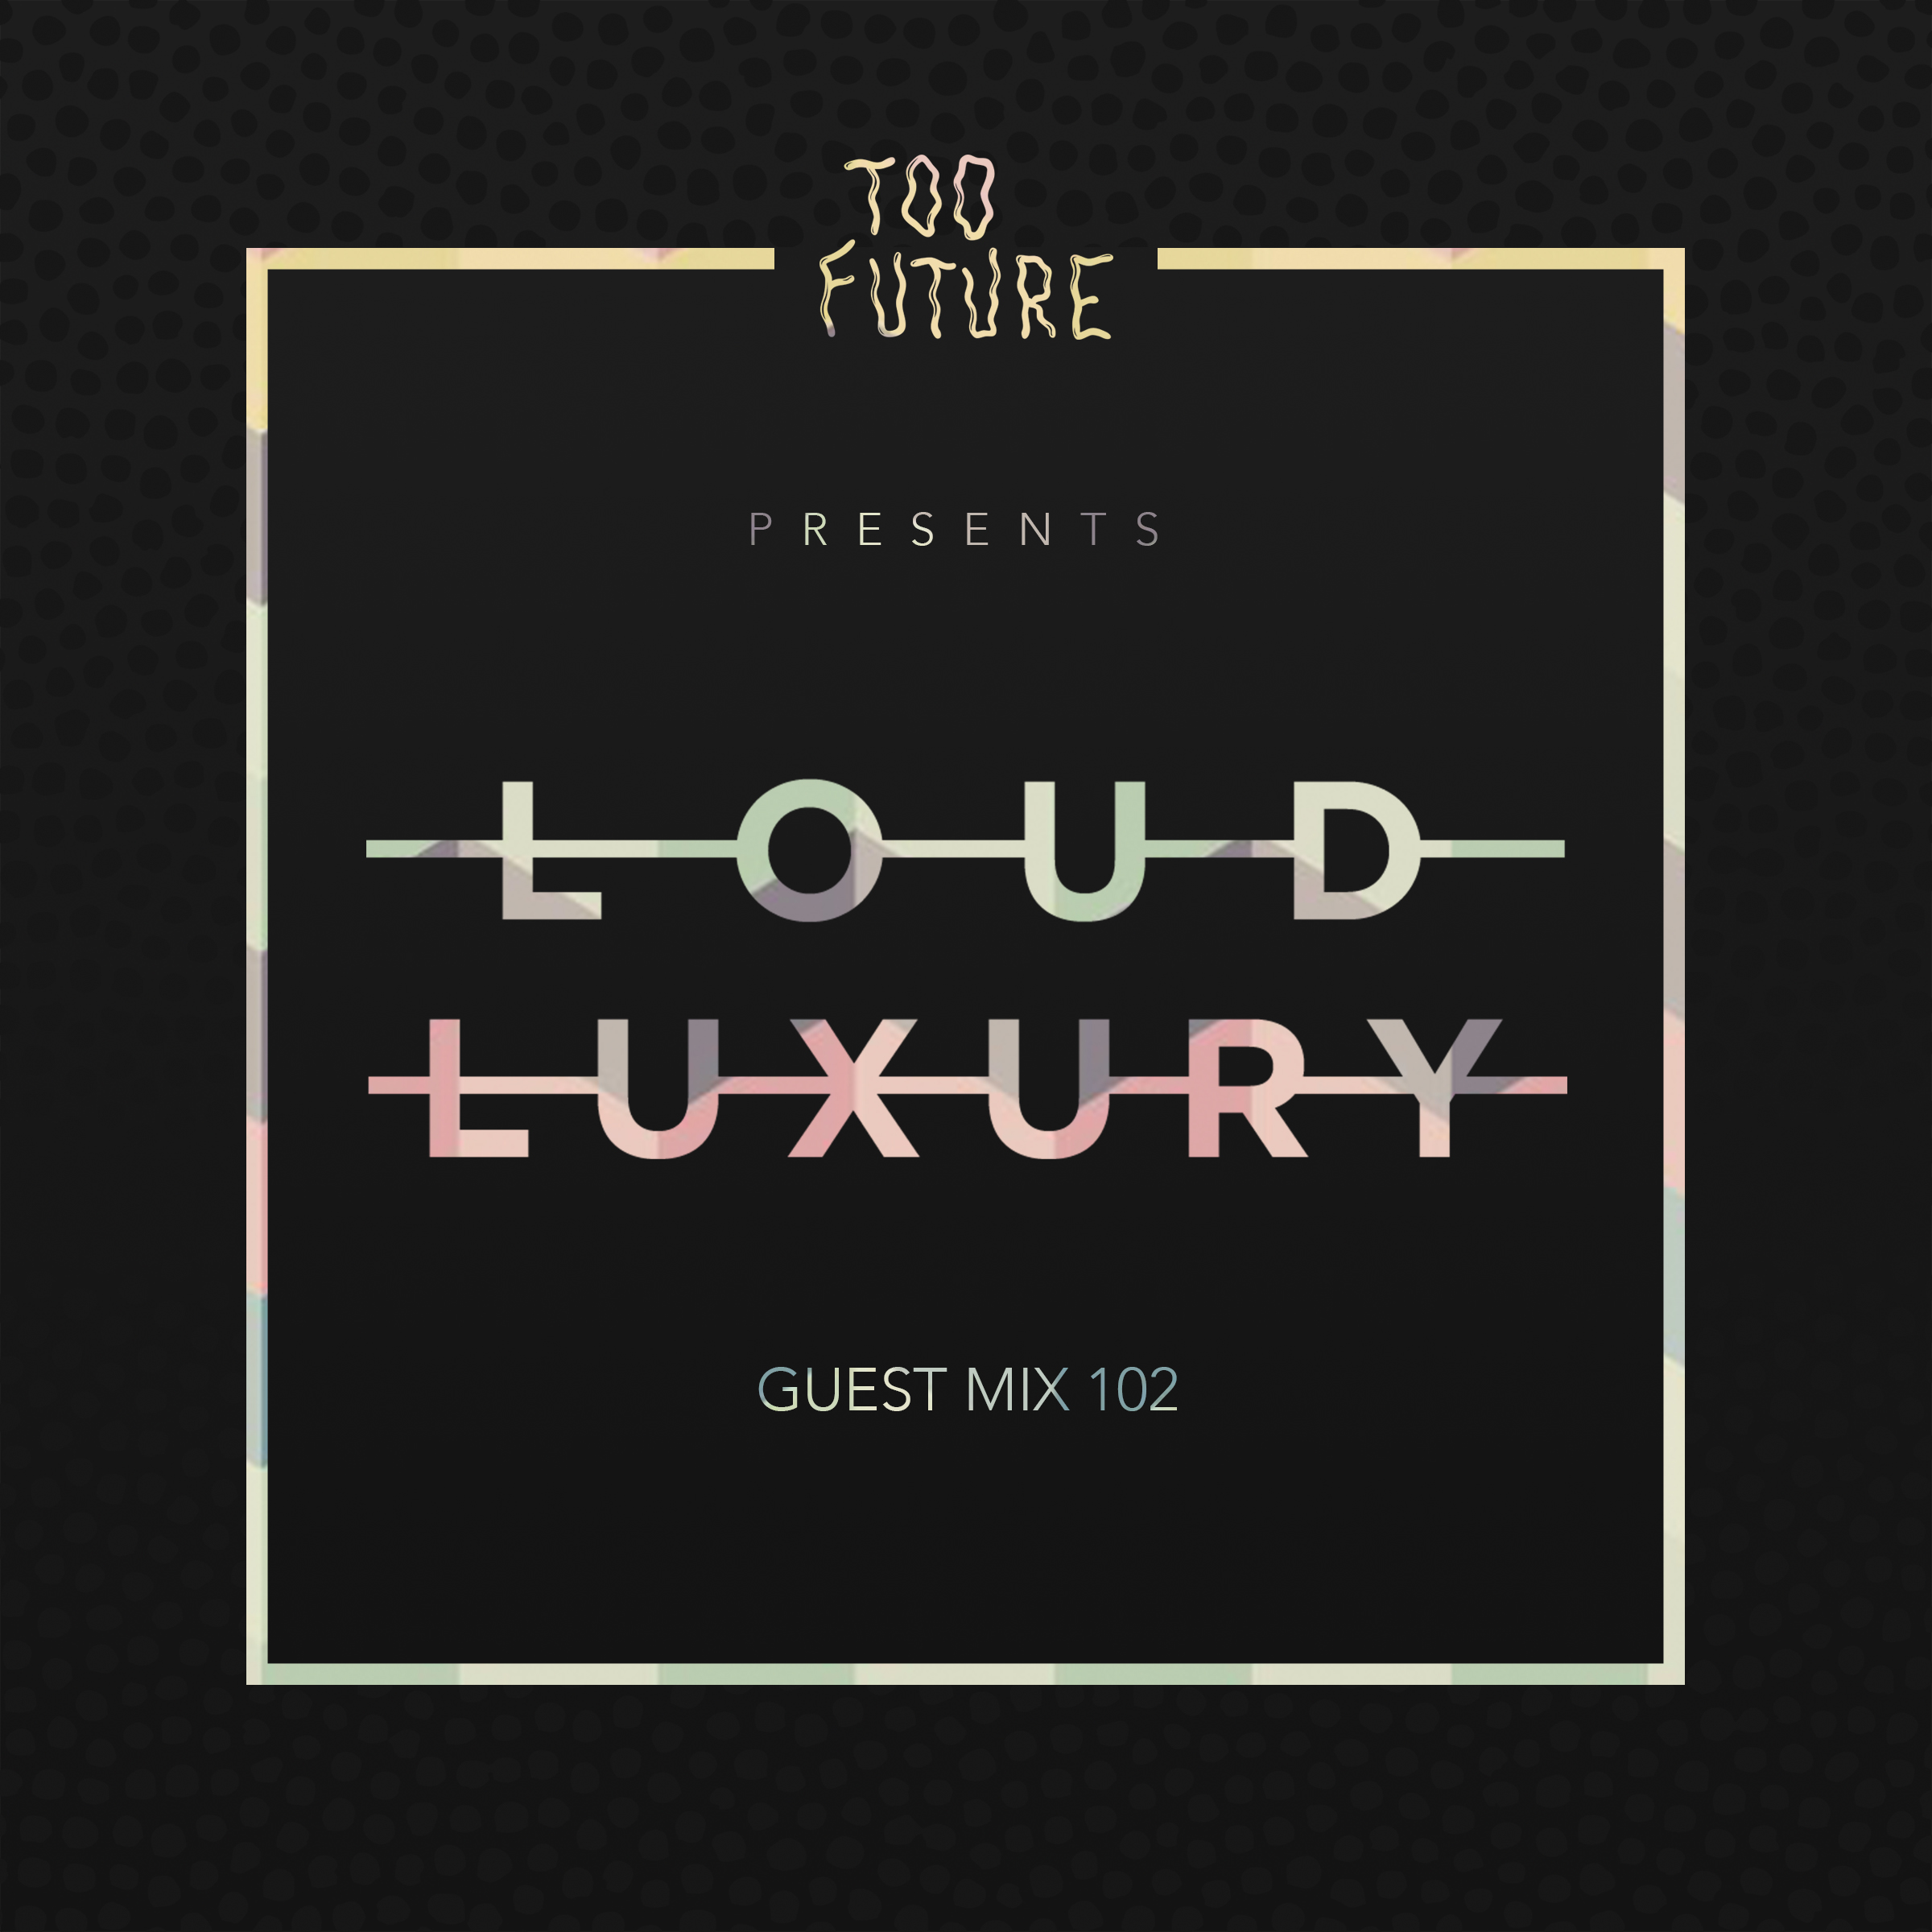 TOO-FUTURE-GUEST-MIX-ART-LOUD-LUXURY